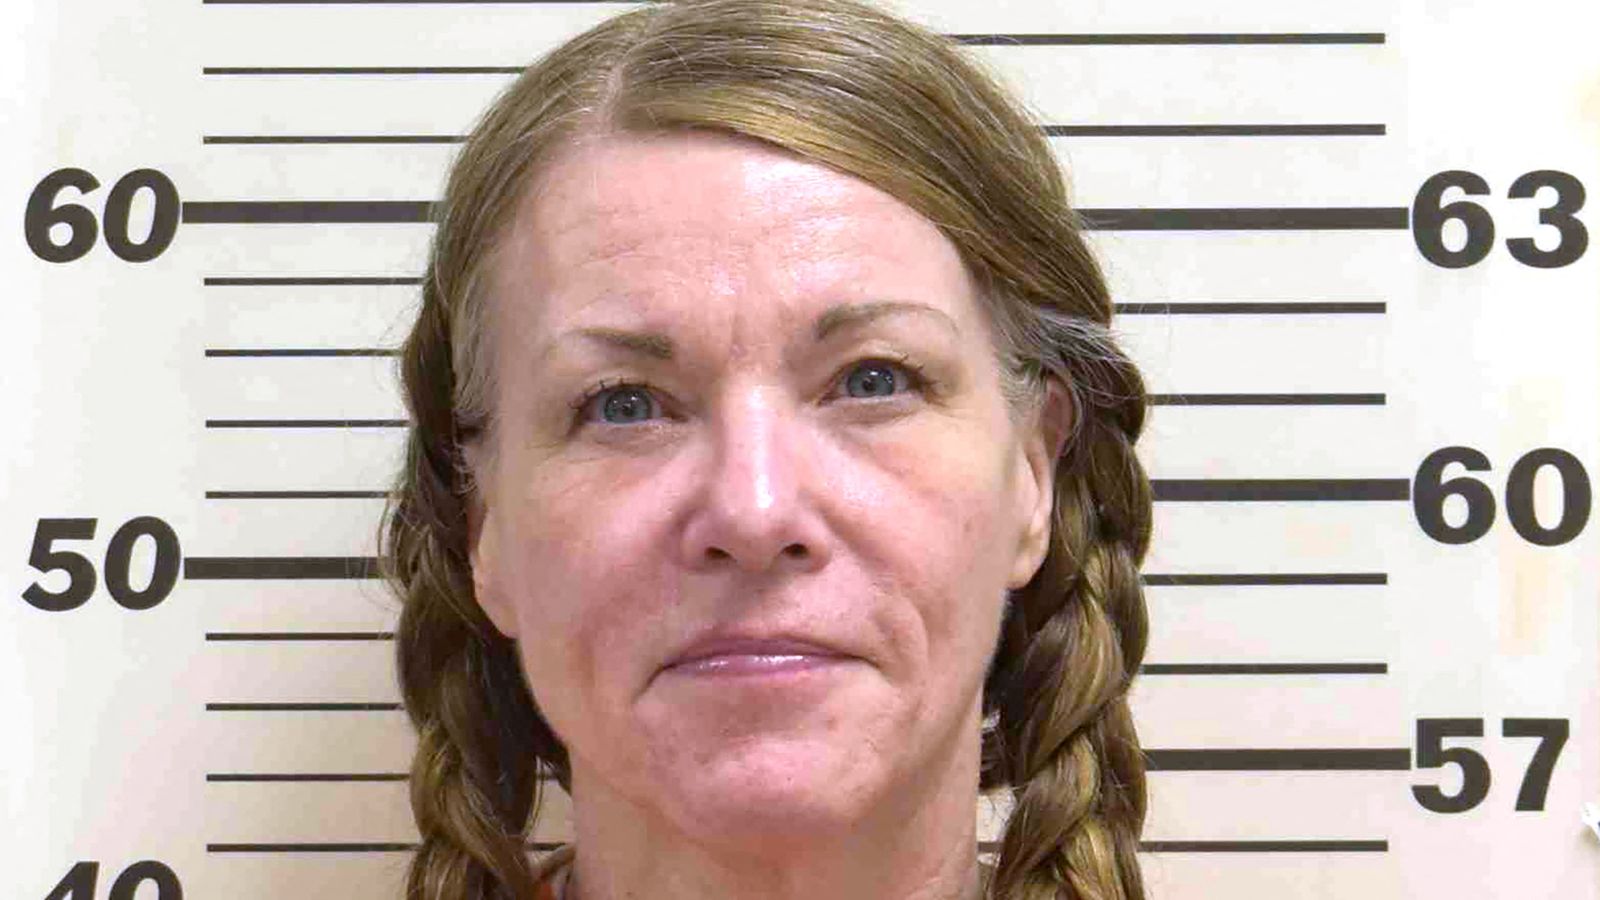 'Doomsday mom' Lori Vallow jailed for life for murdering two of her children